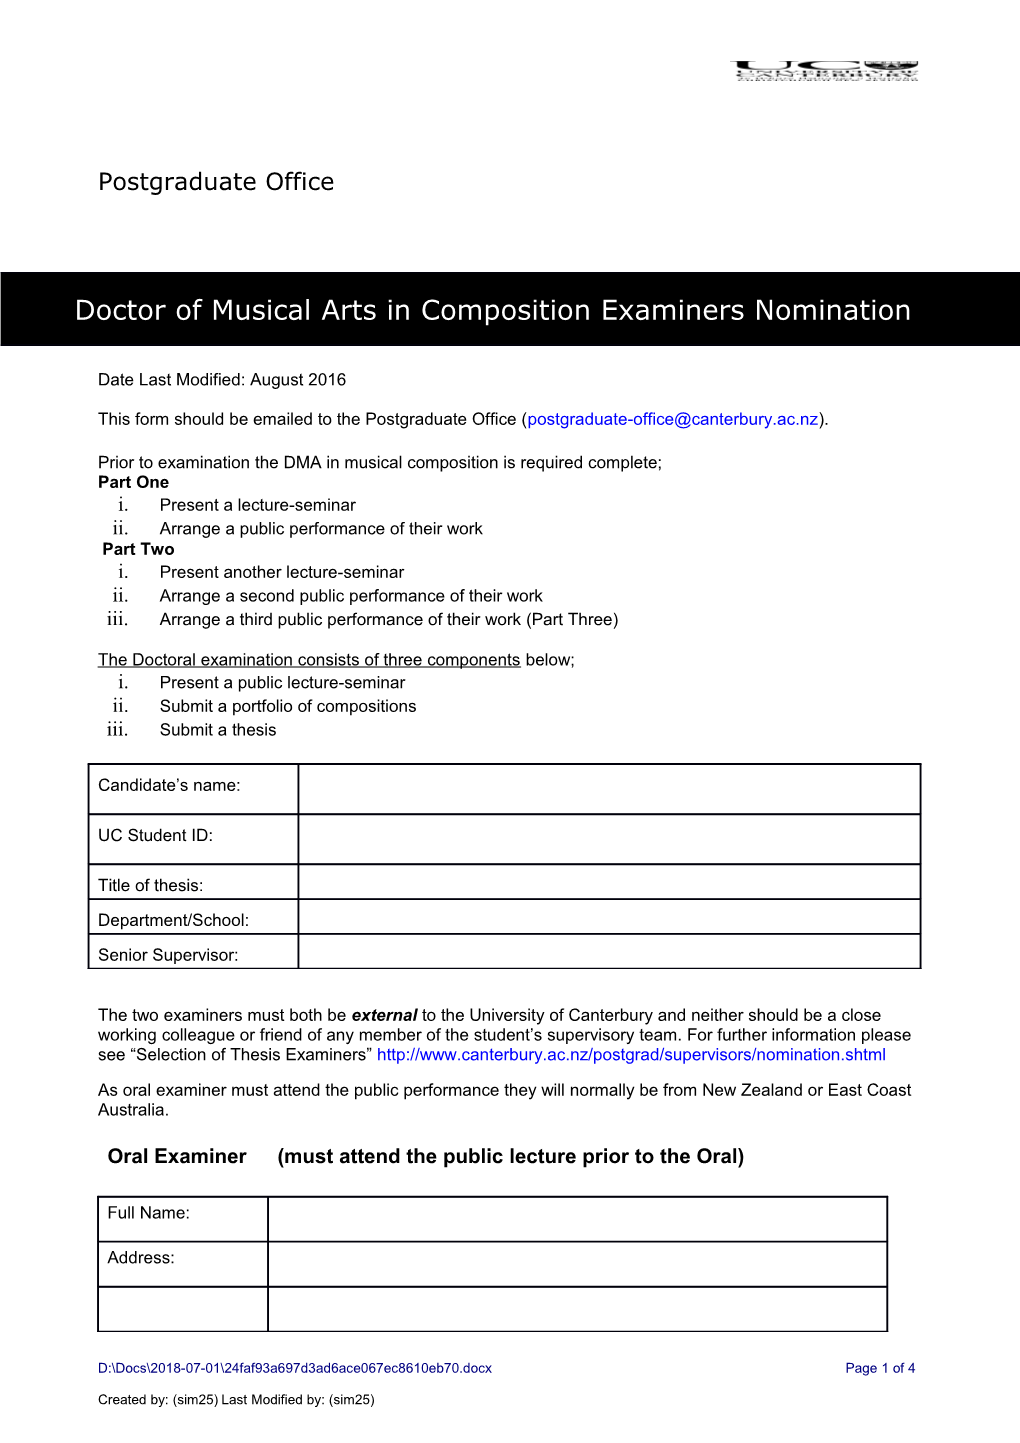 This Form Should Be Emailed to the Postgraduate Office ()